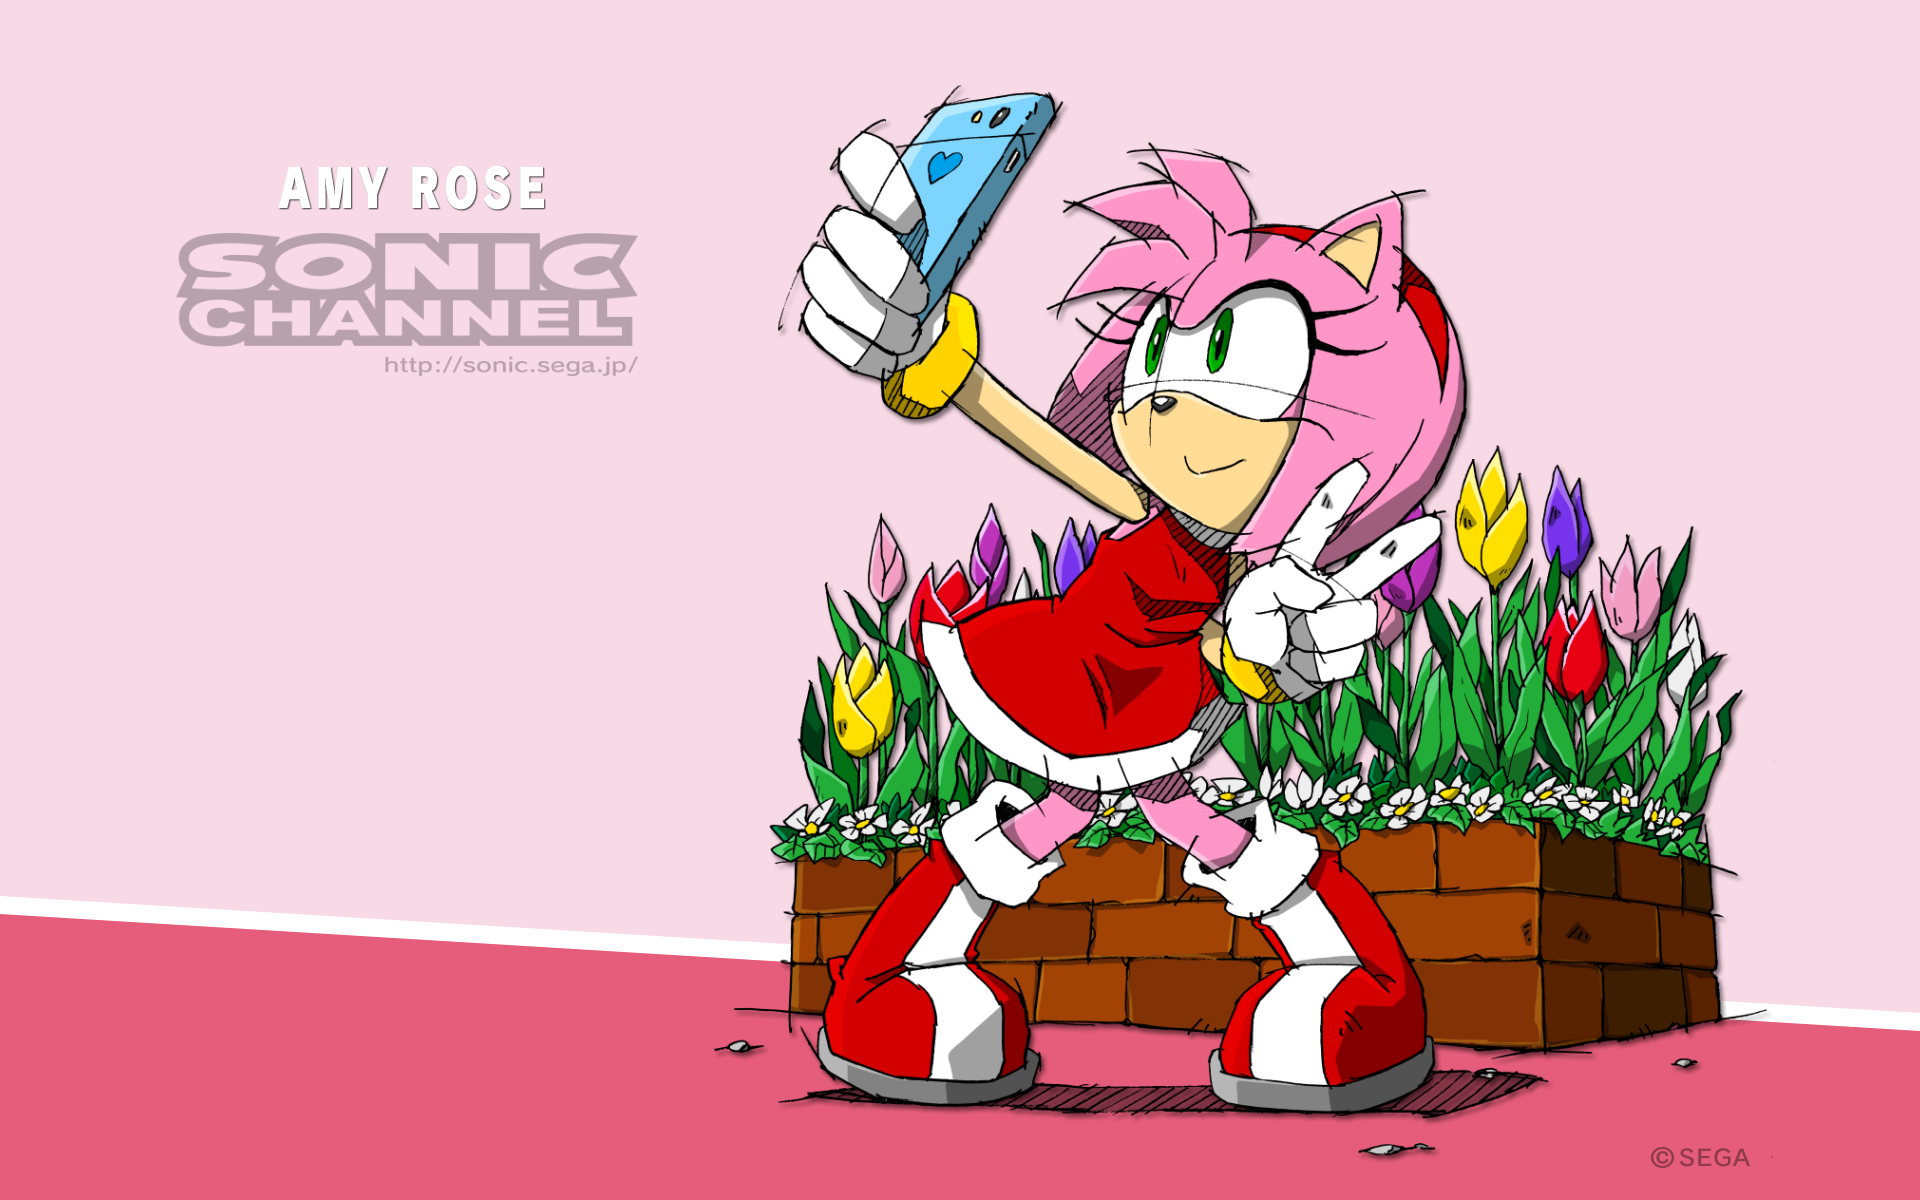 [download This Wallpaper For Pc] - Amy Rose Sonic Channel , HD Wallpaper & Backgrounds